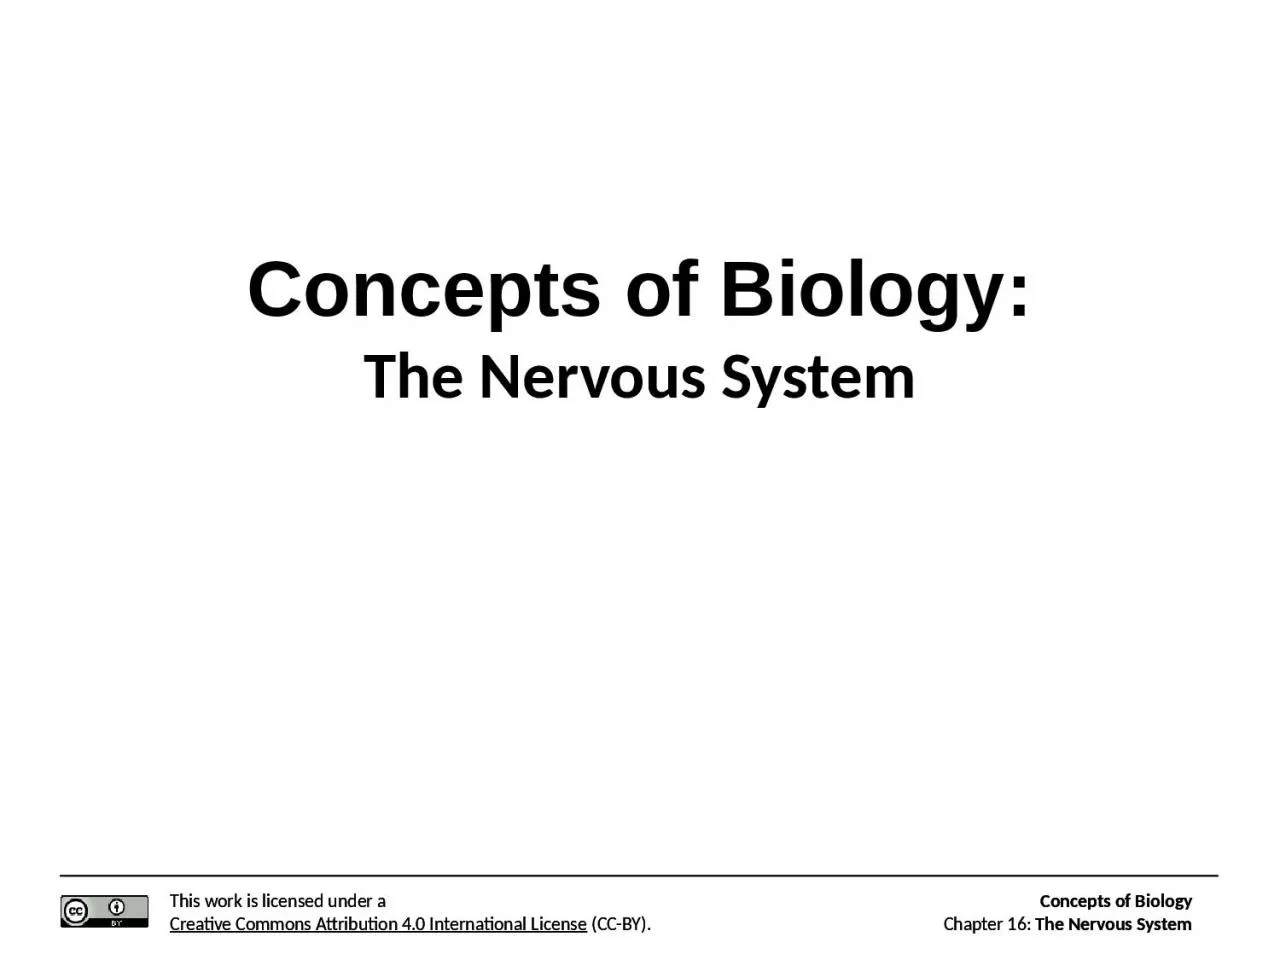 Concepts of Biology: The Nervous